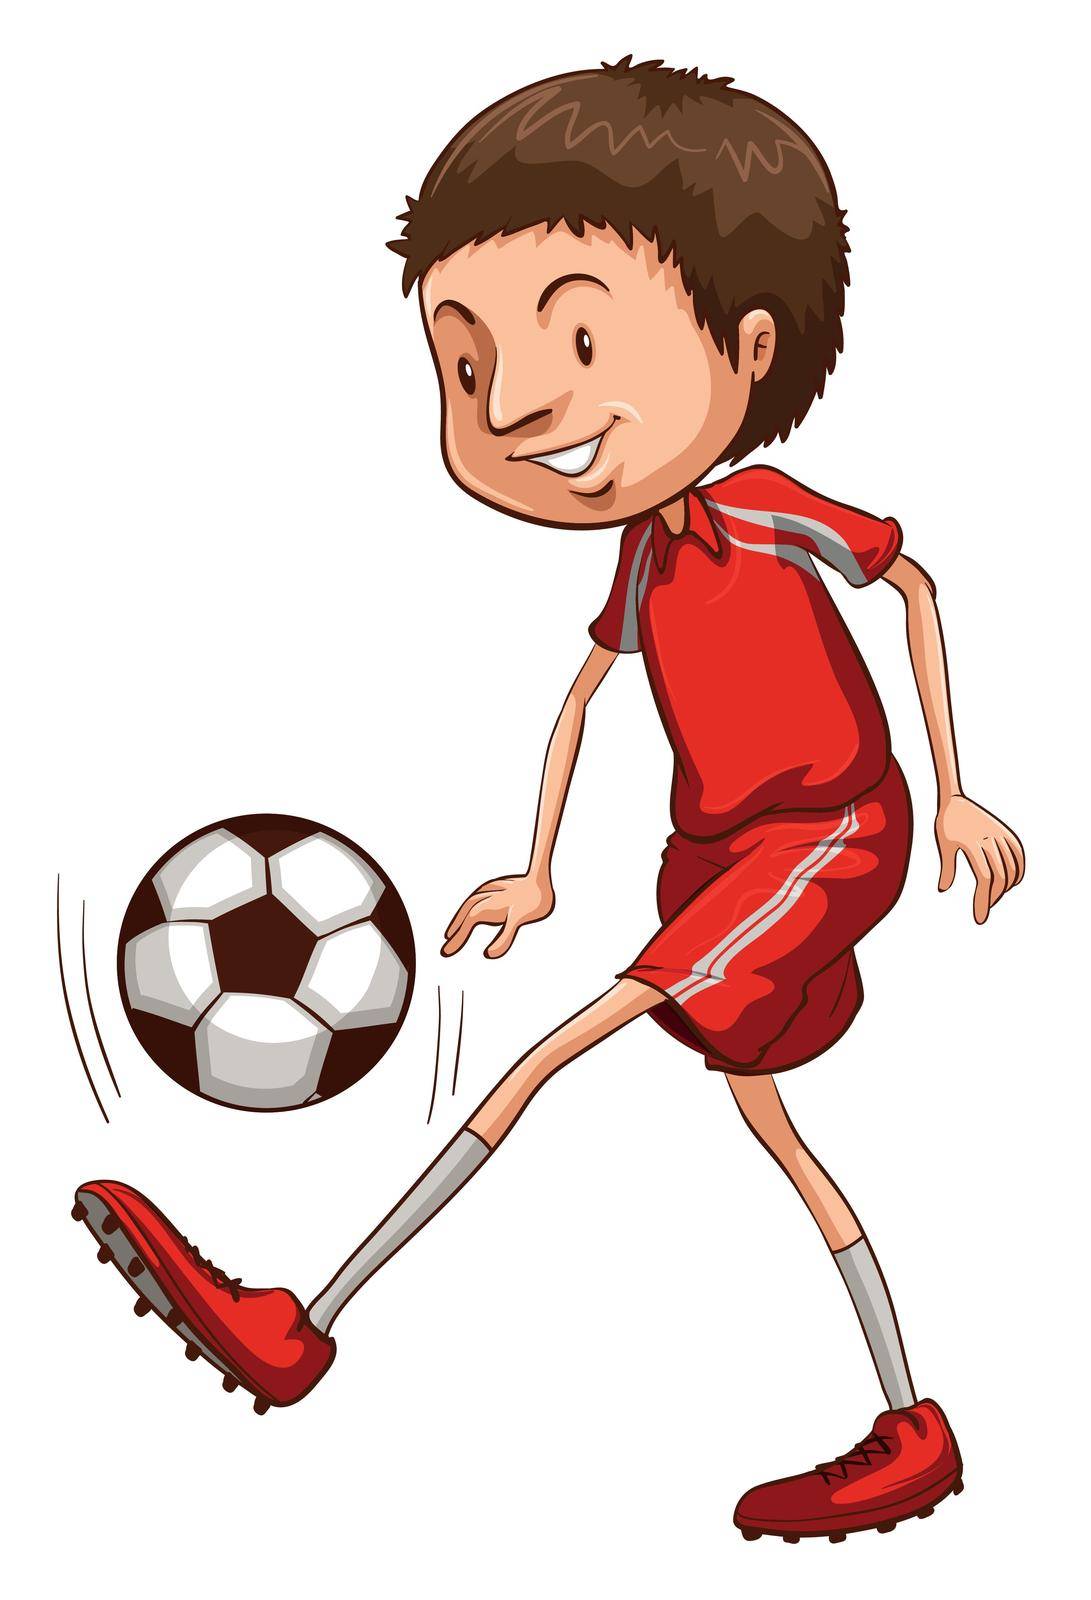 Illustration of a young soccer player on a white background